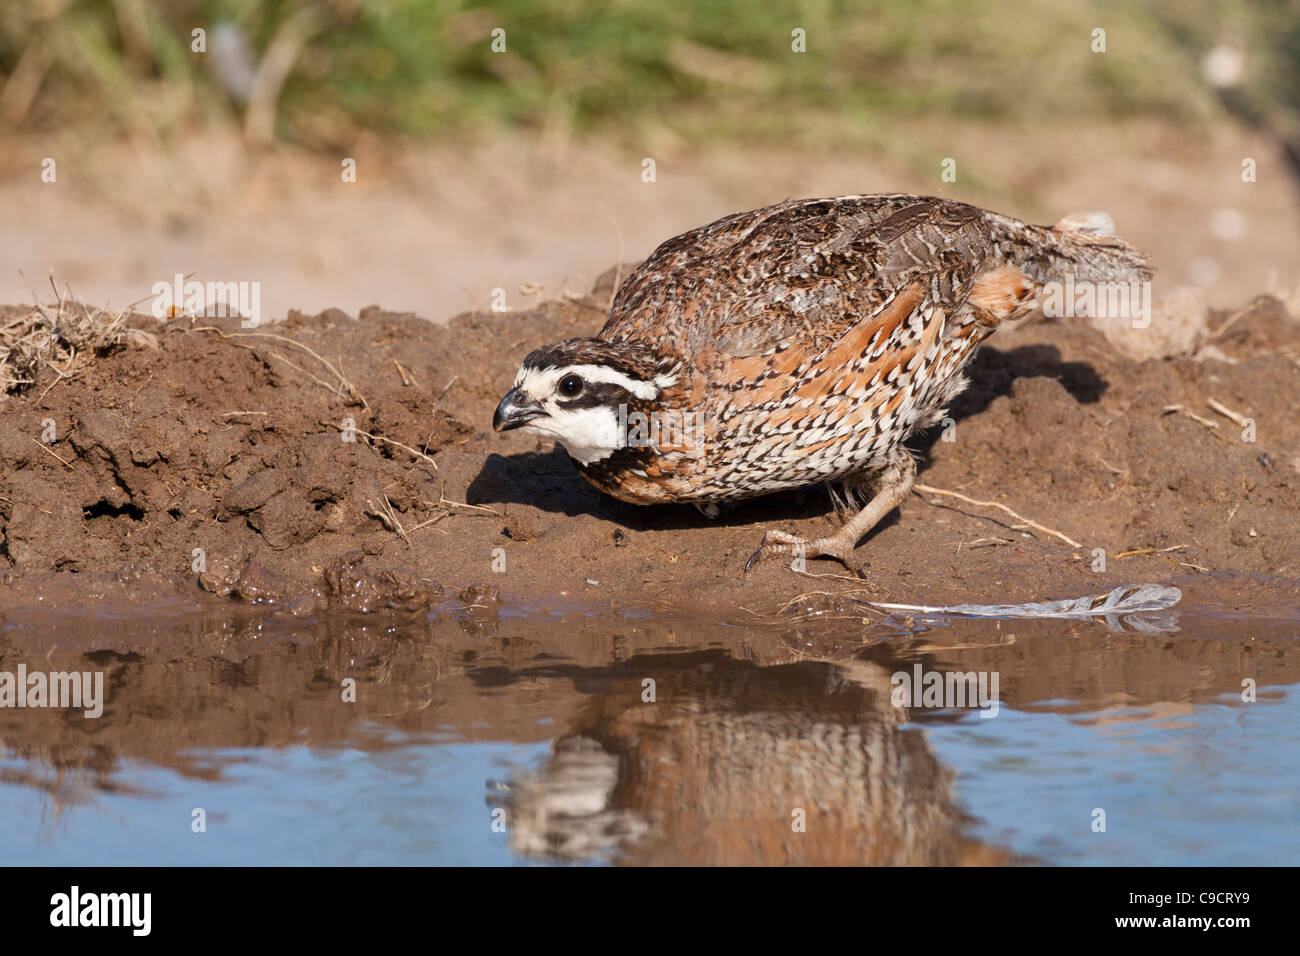 Northern Bobwhite, bobwhite quail (Colinus virginianus) which received its name from a distinct, whistled 'bobwhite' call, at a ranch in South Texas. Stock Photo